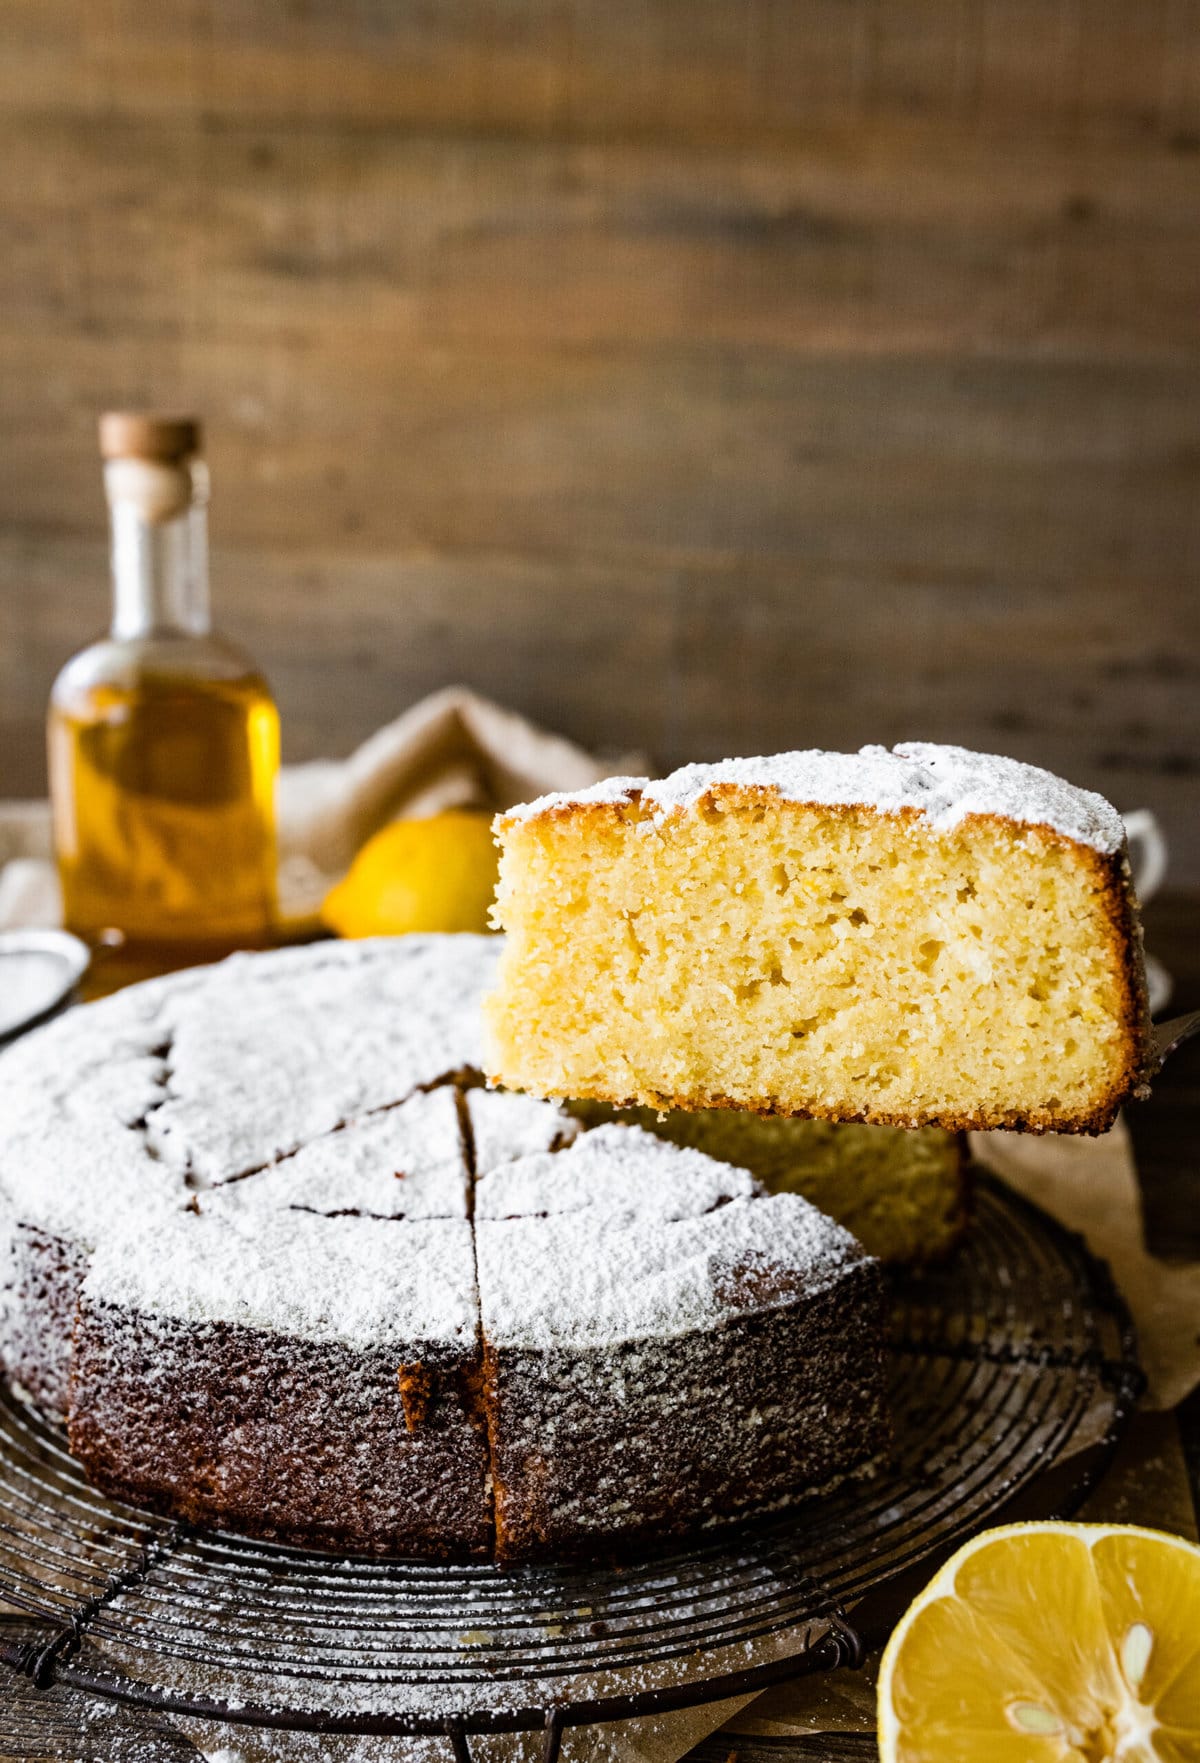 baked best olive oil cake with powdered sugar on top. Cake cut into slices. One slice is taken out with a cake server. 